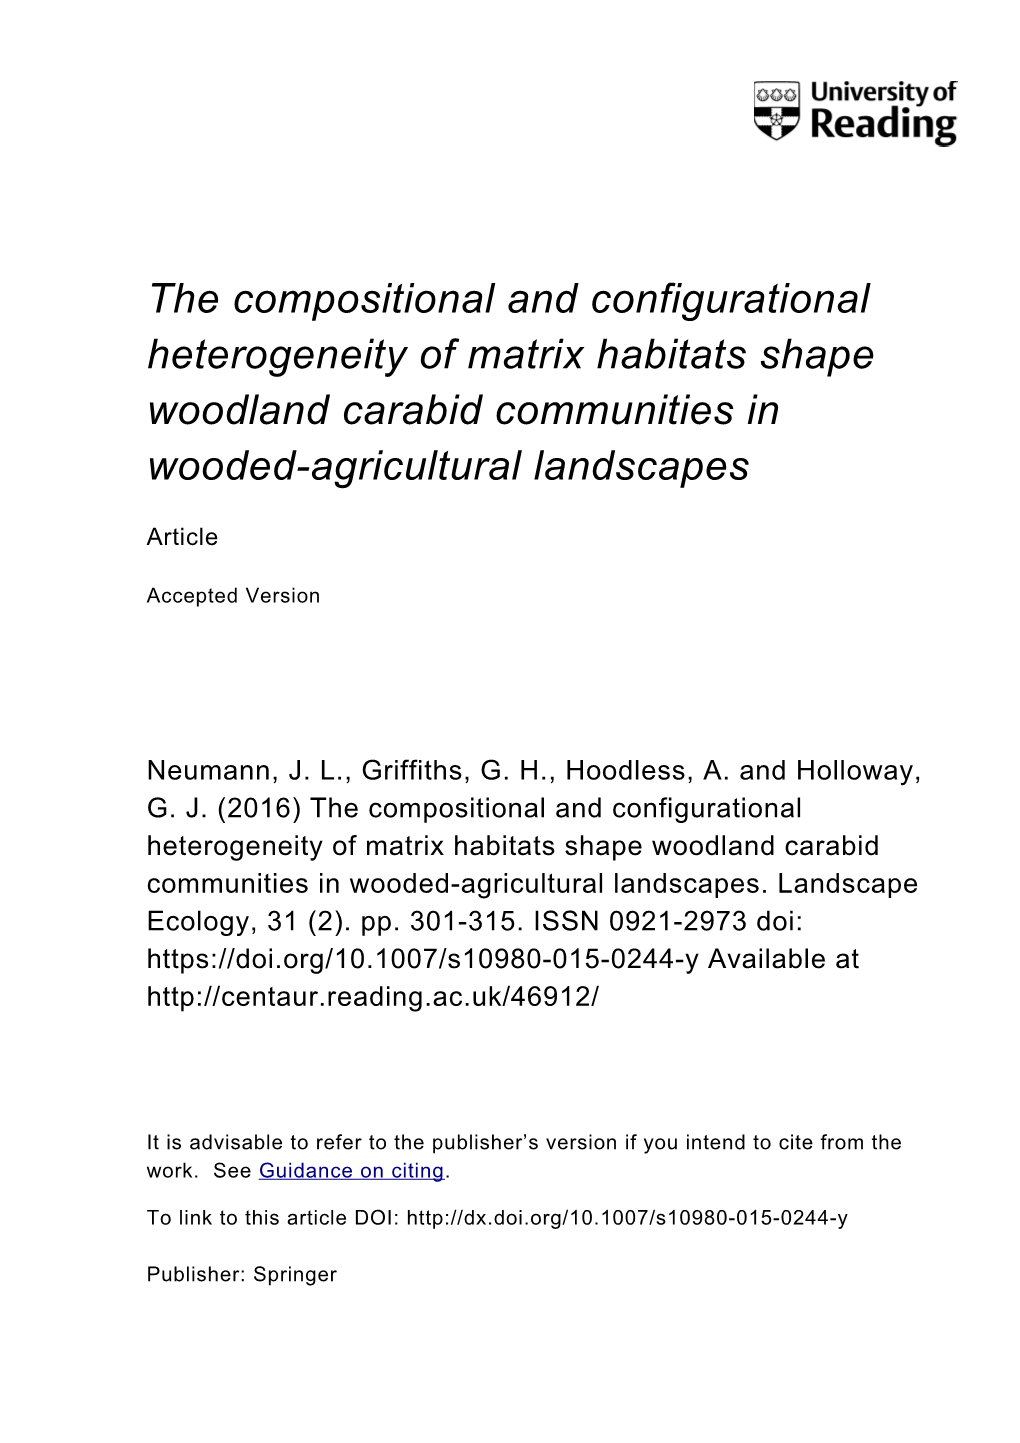 The Compositional and Configurational Heterogeneity of Matrix Habitats Shape Woodland Carabid Communities in Wooded-Agricultural Landscapes